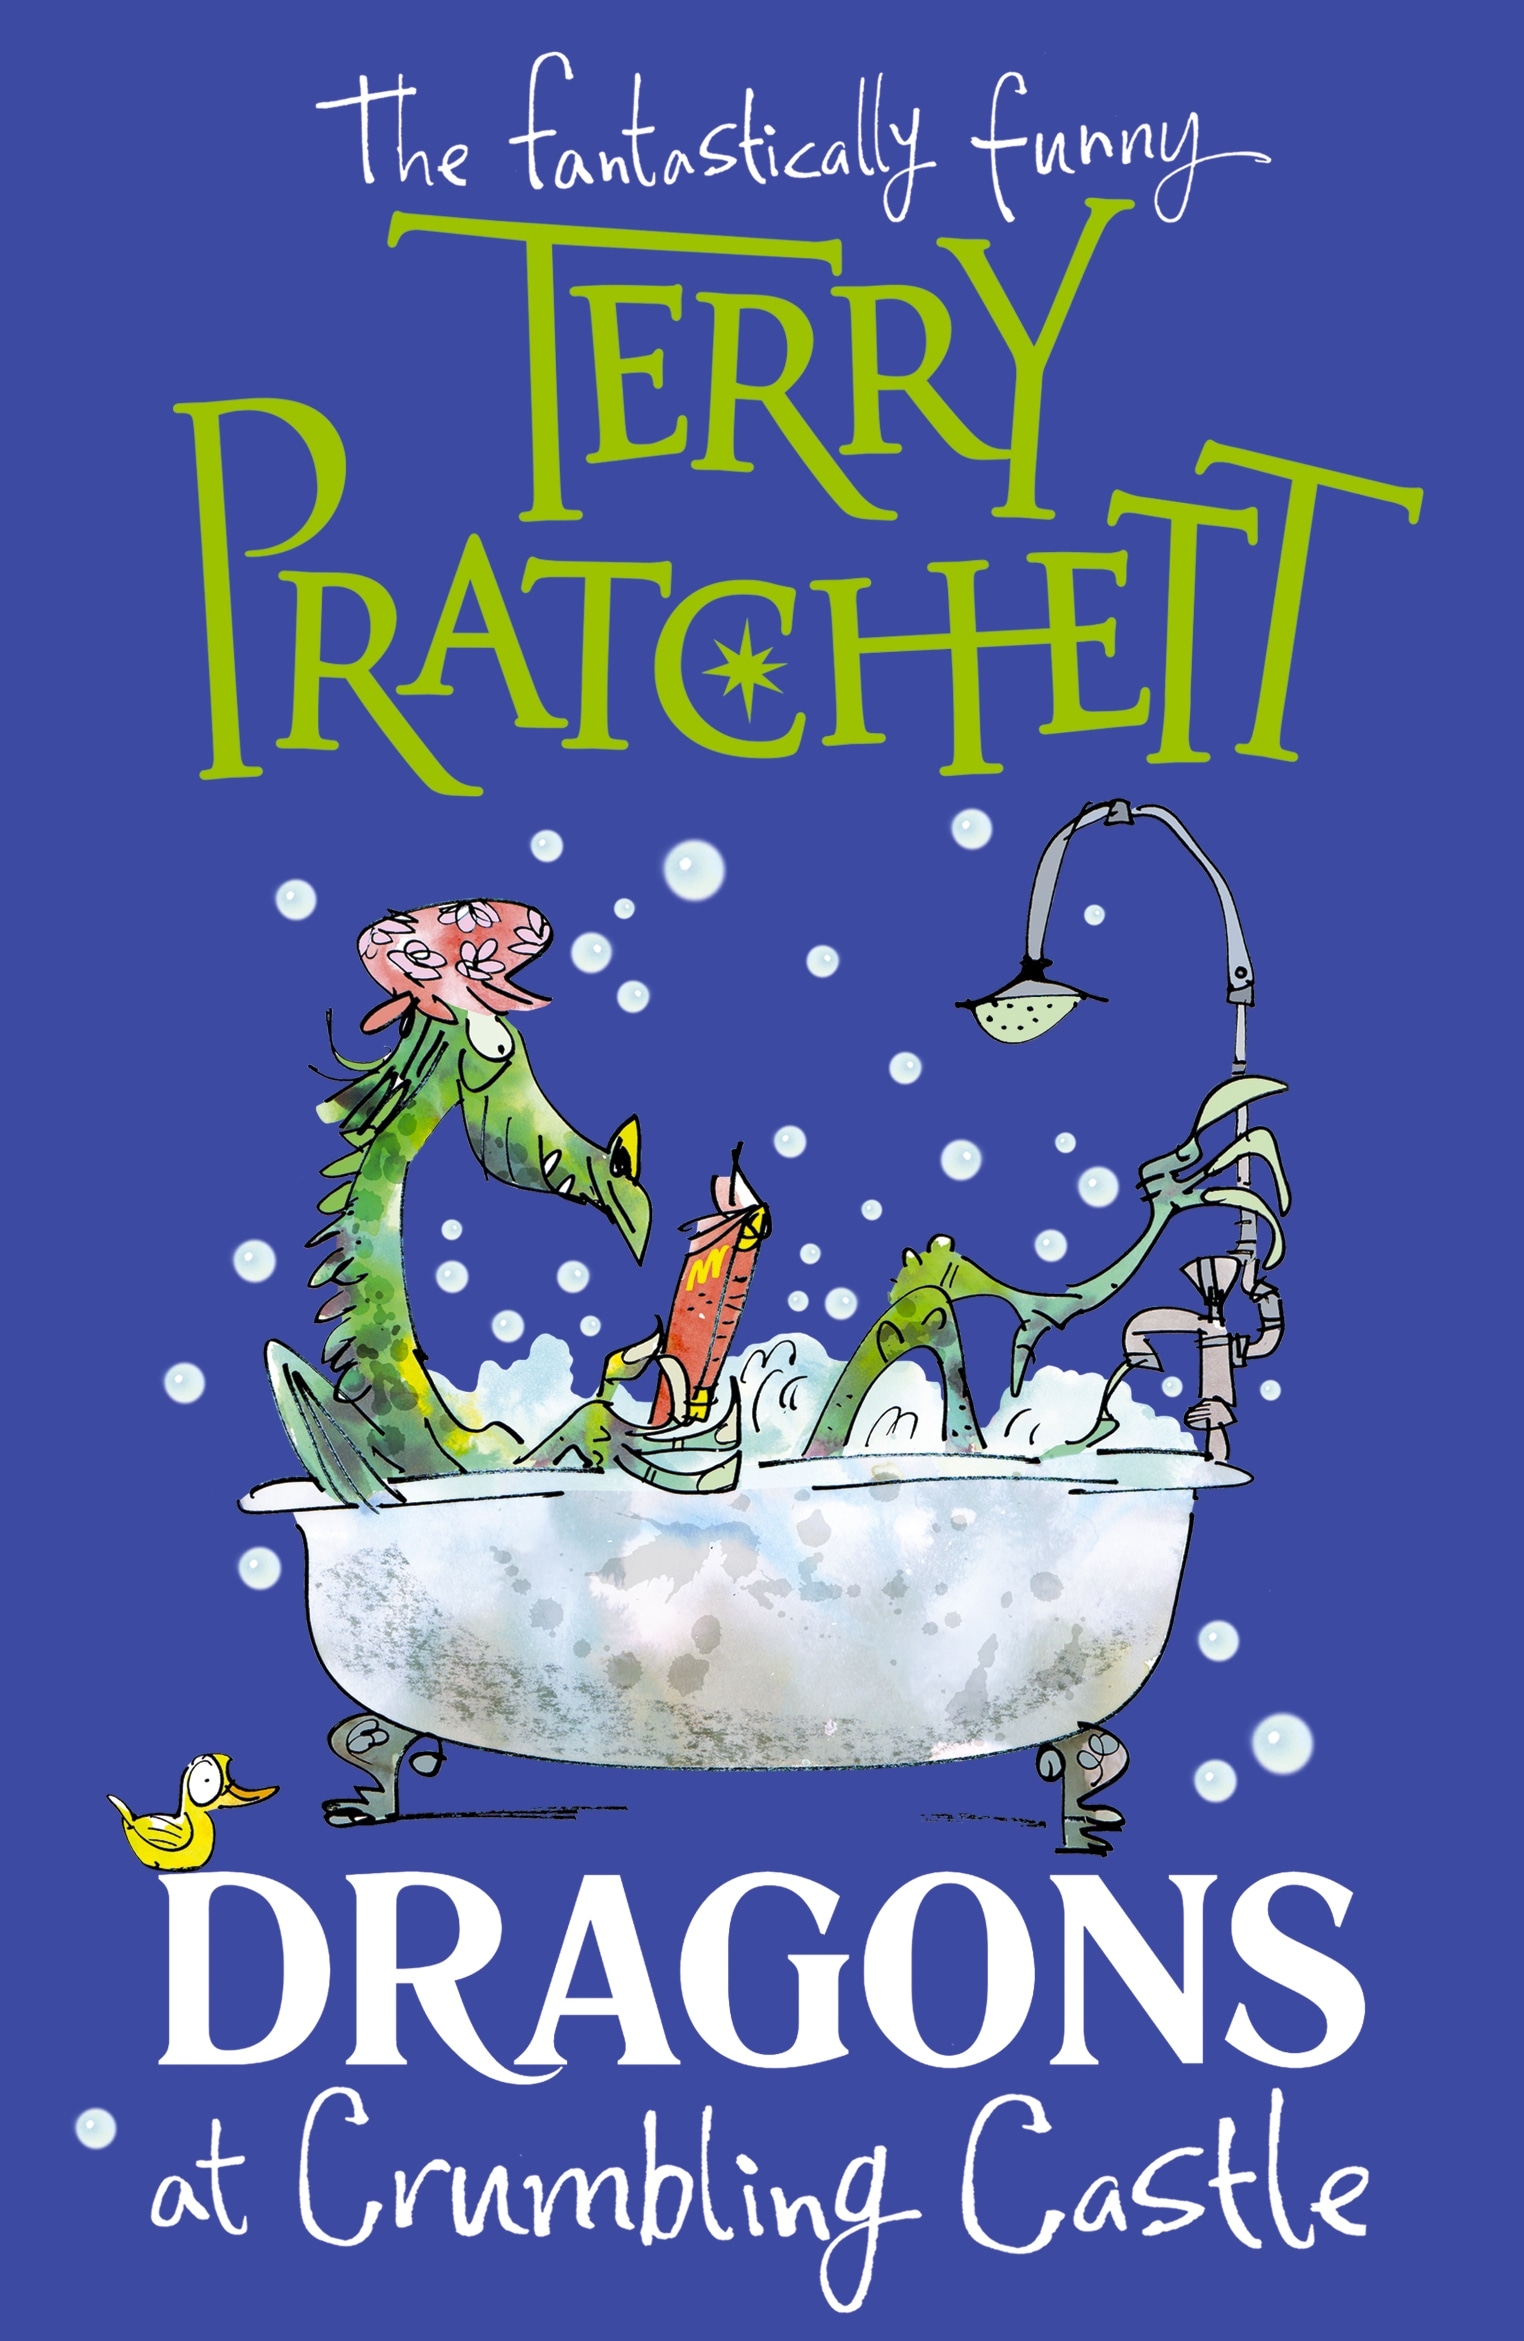 Book “Dragons at Crumbling Castle” by Terry Pratchett — June 4, 2015